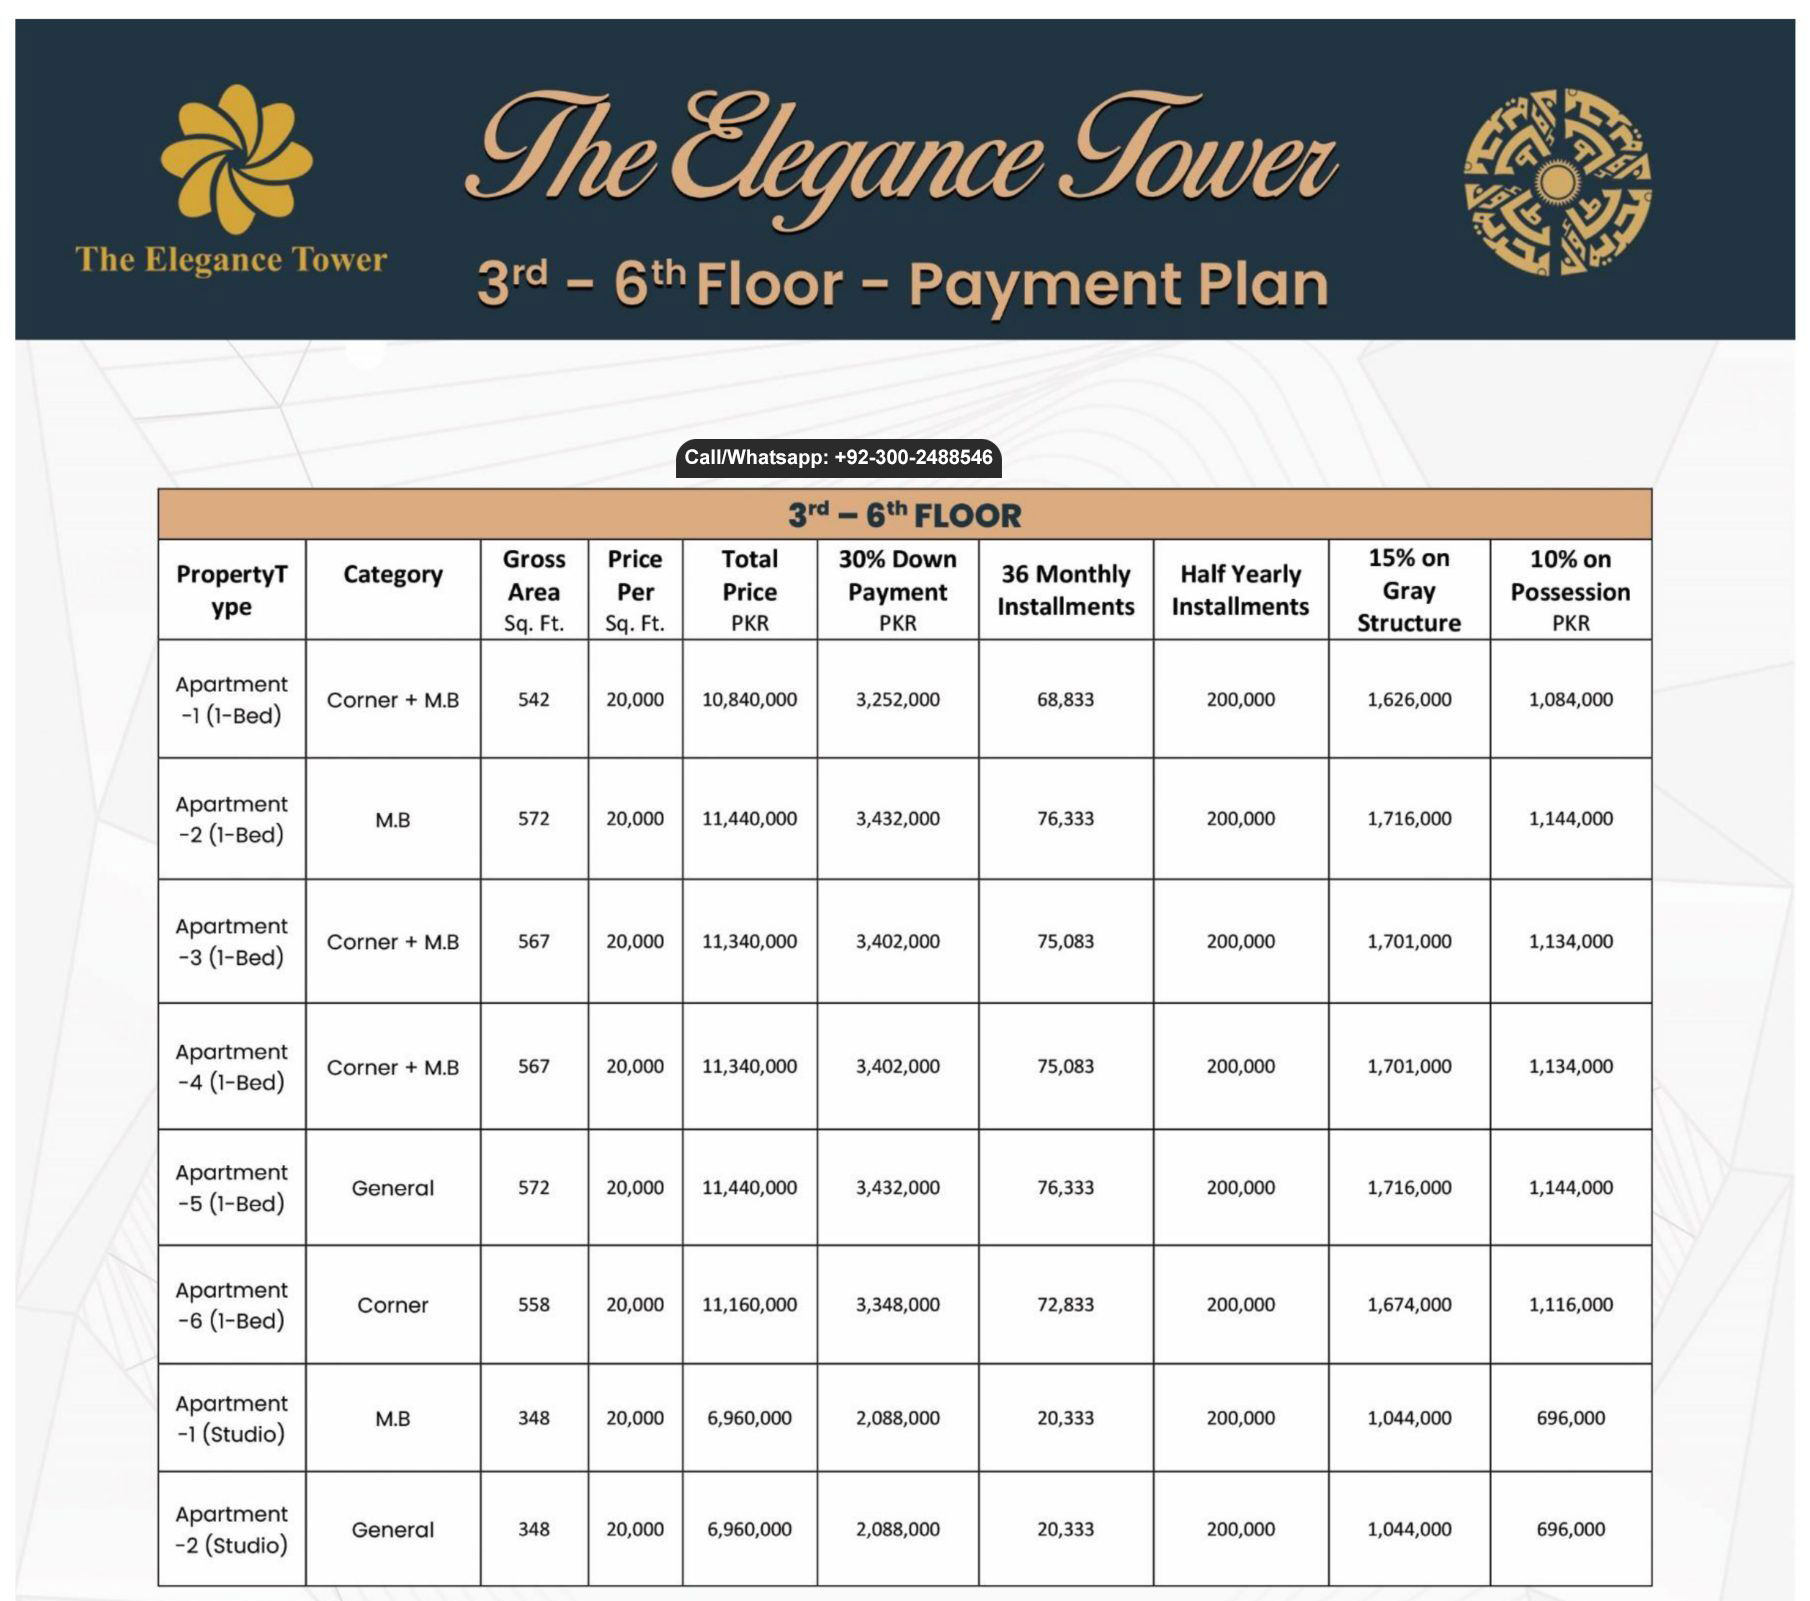 The Elegance Tower Payment Plan